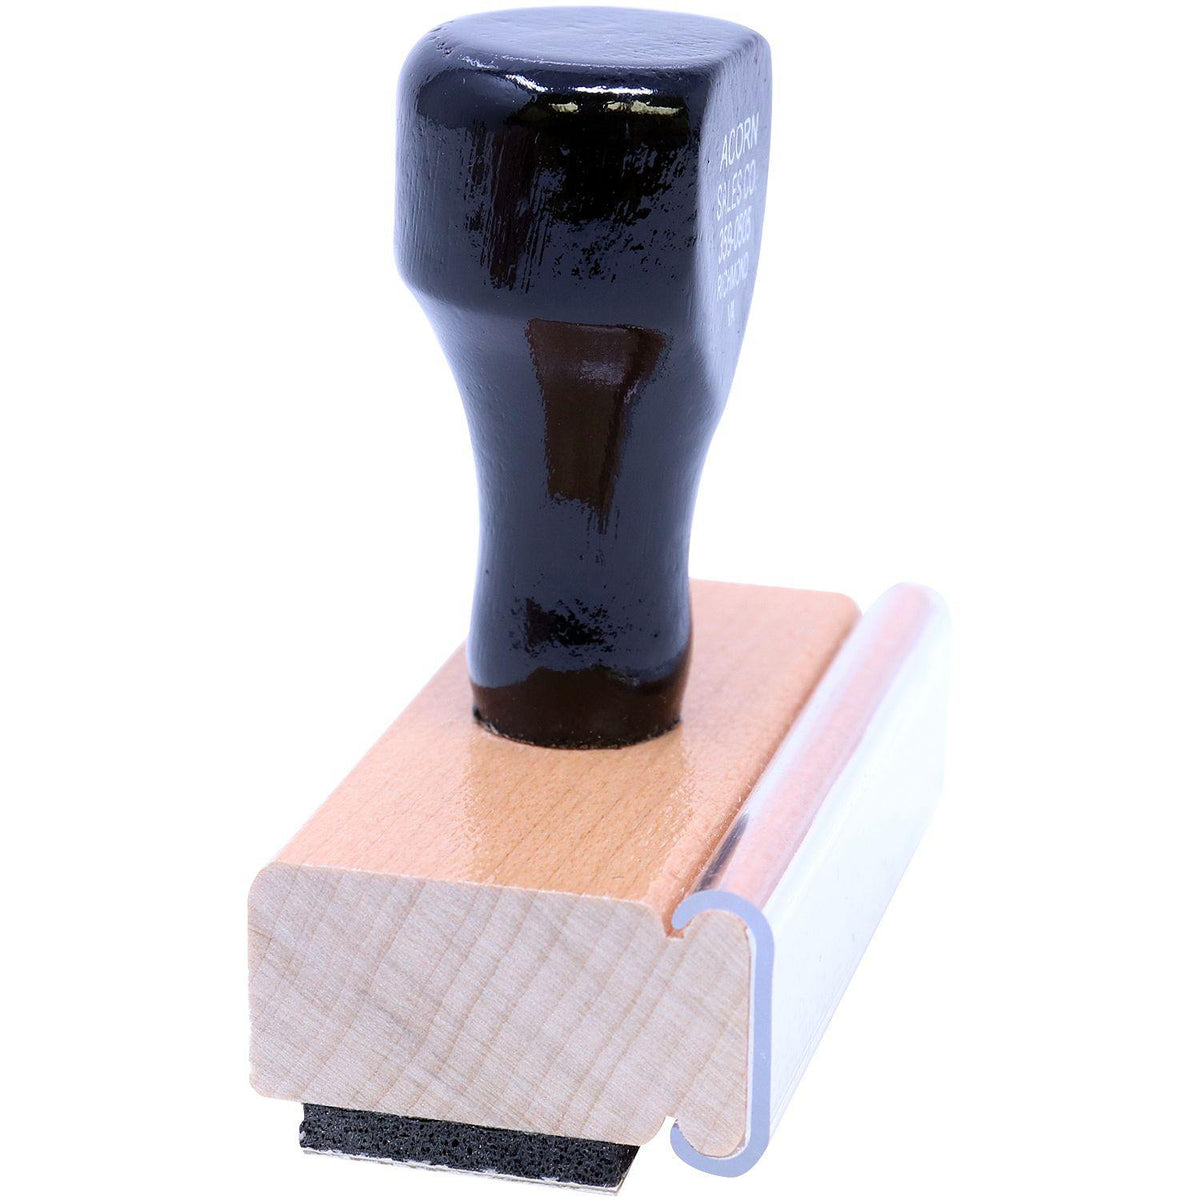 Side View of Bravo with Hands Rubber Stamp at an Angle